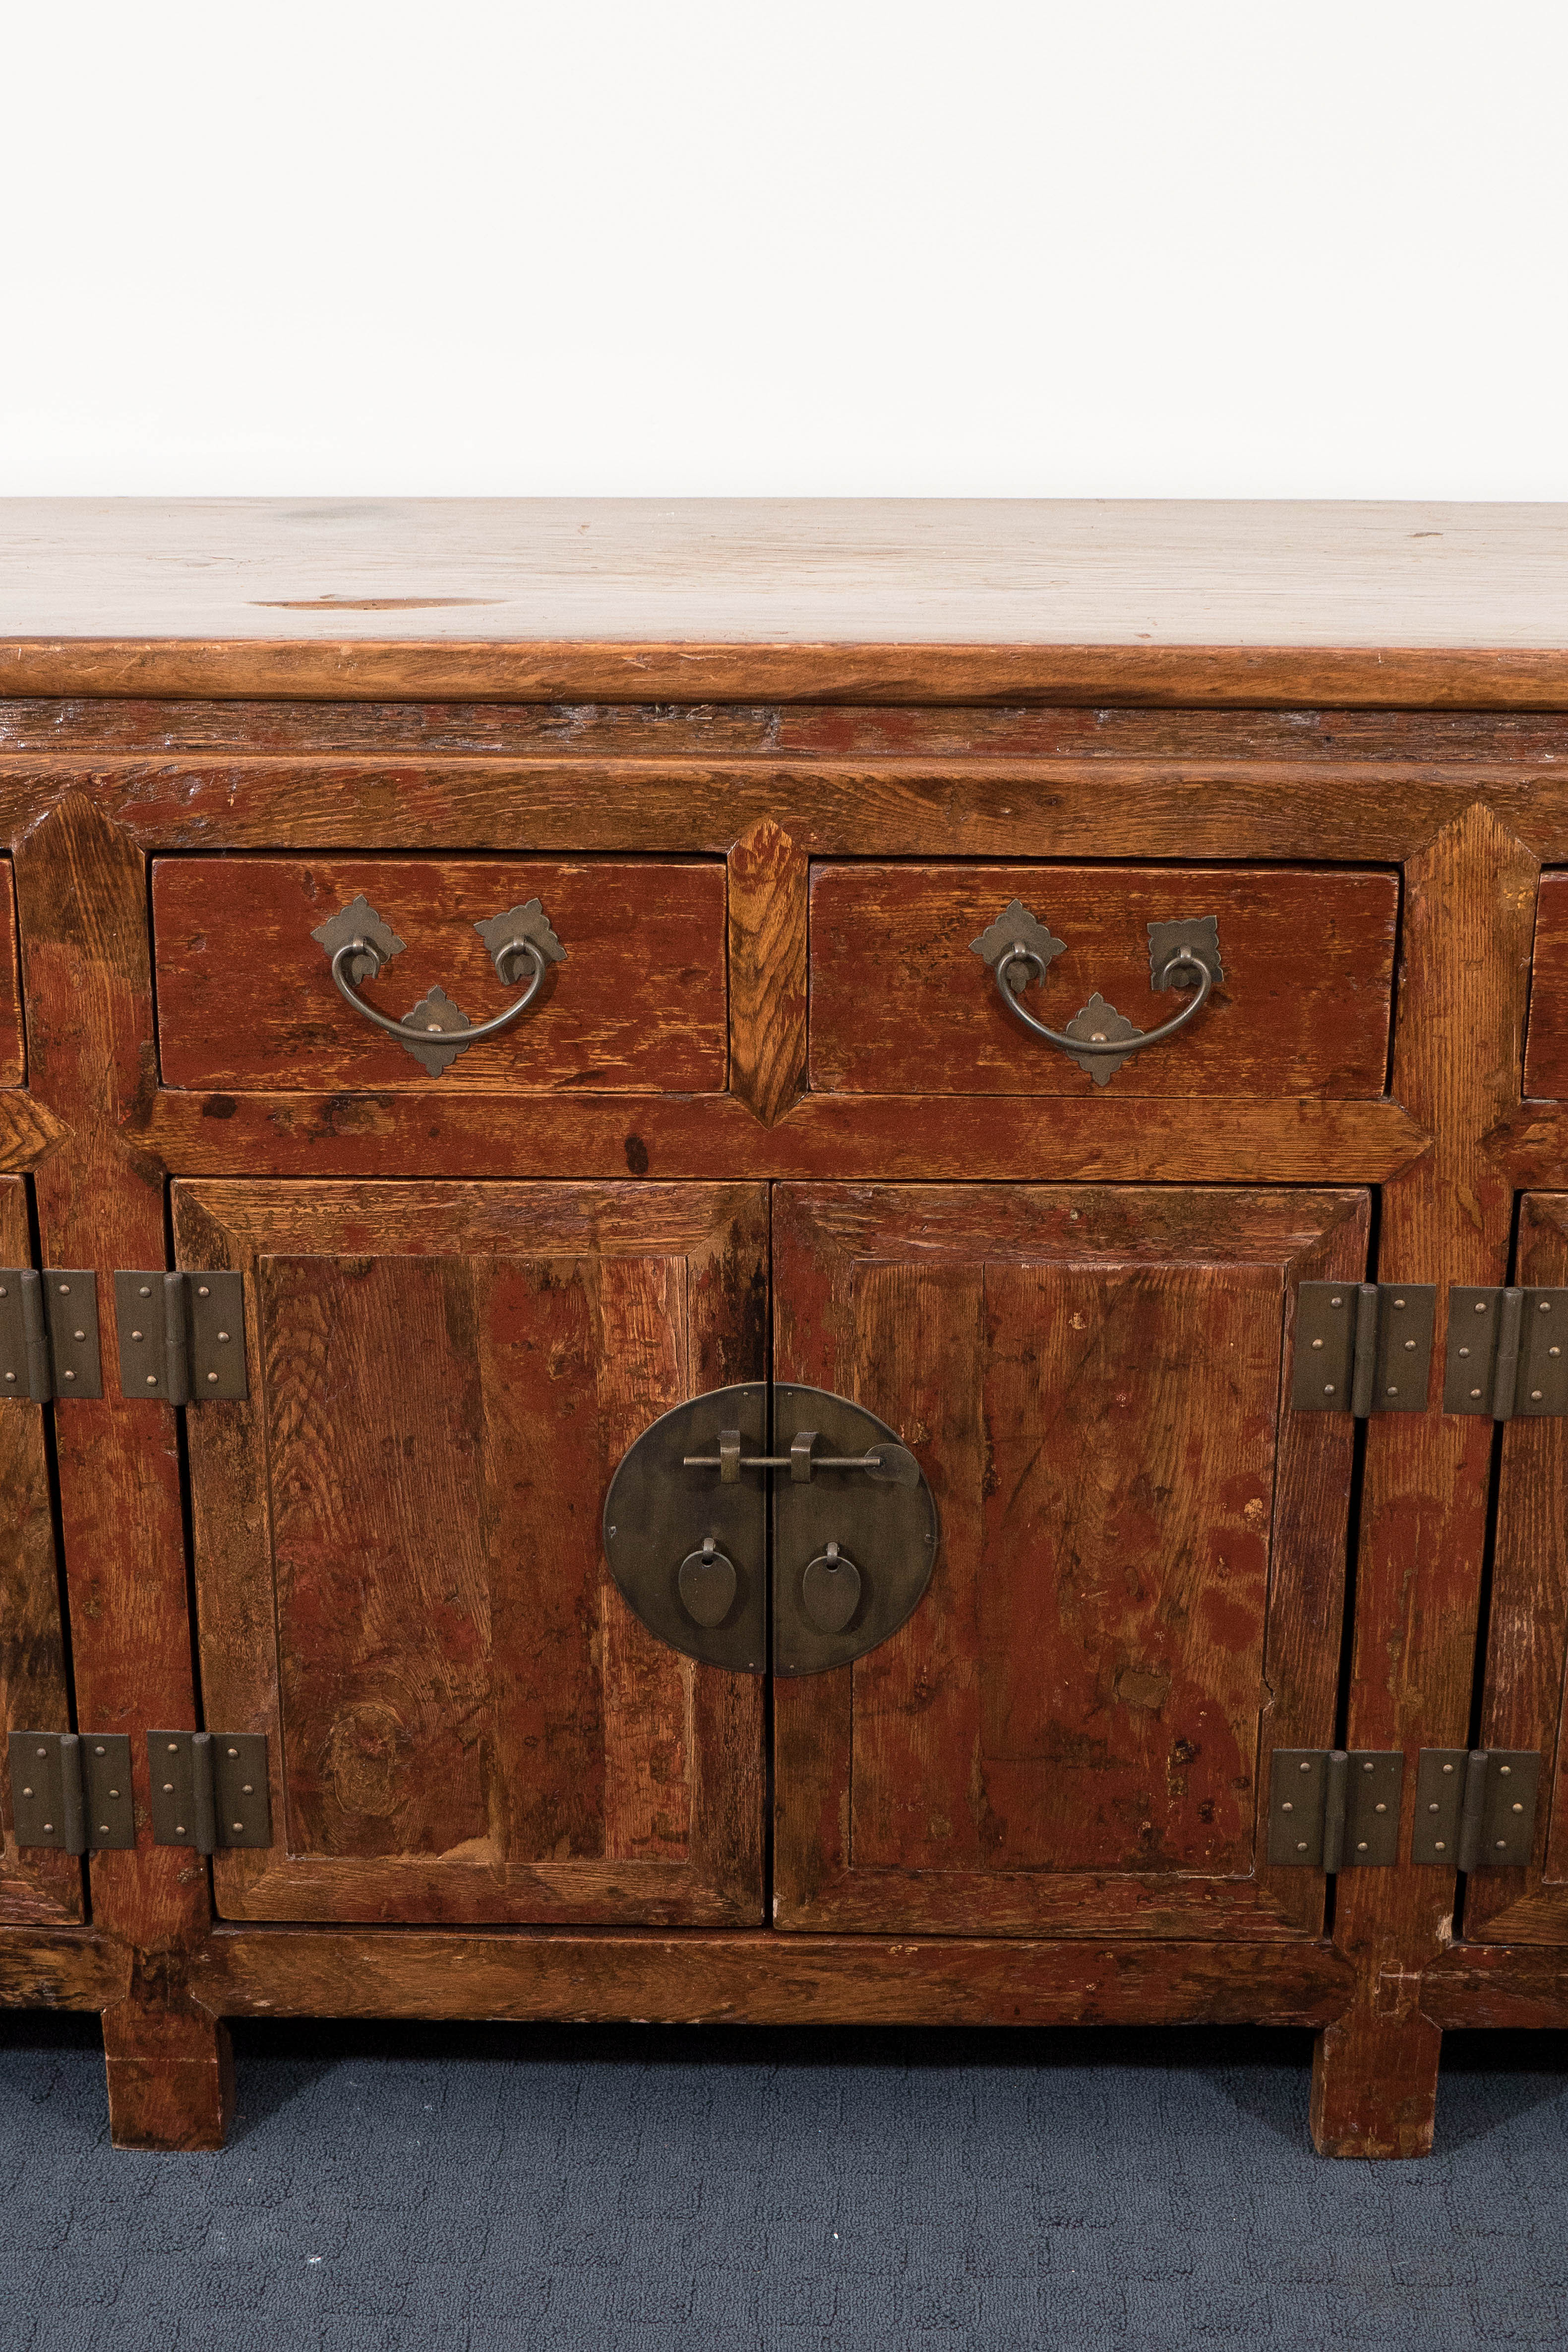 An antique wooden buffet and sideboard, originating from Tianjin, mainland China, produced circa mid to late 19th century, which includes six exterior drawers, above three sets of double doors, with handles, pulls and latch keys in brass. Good